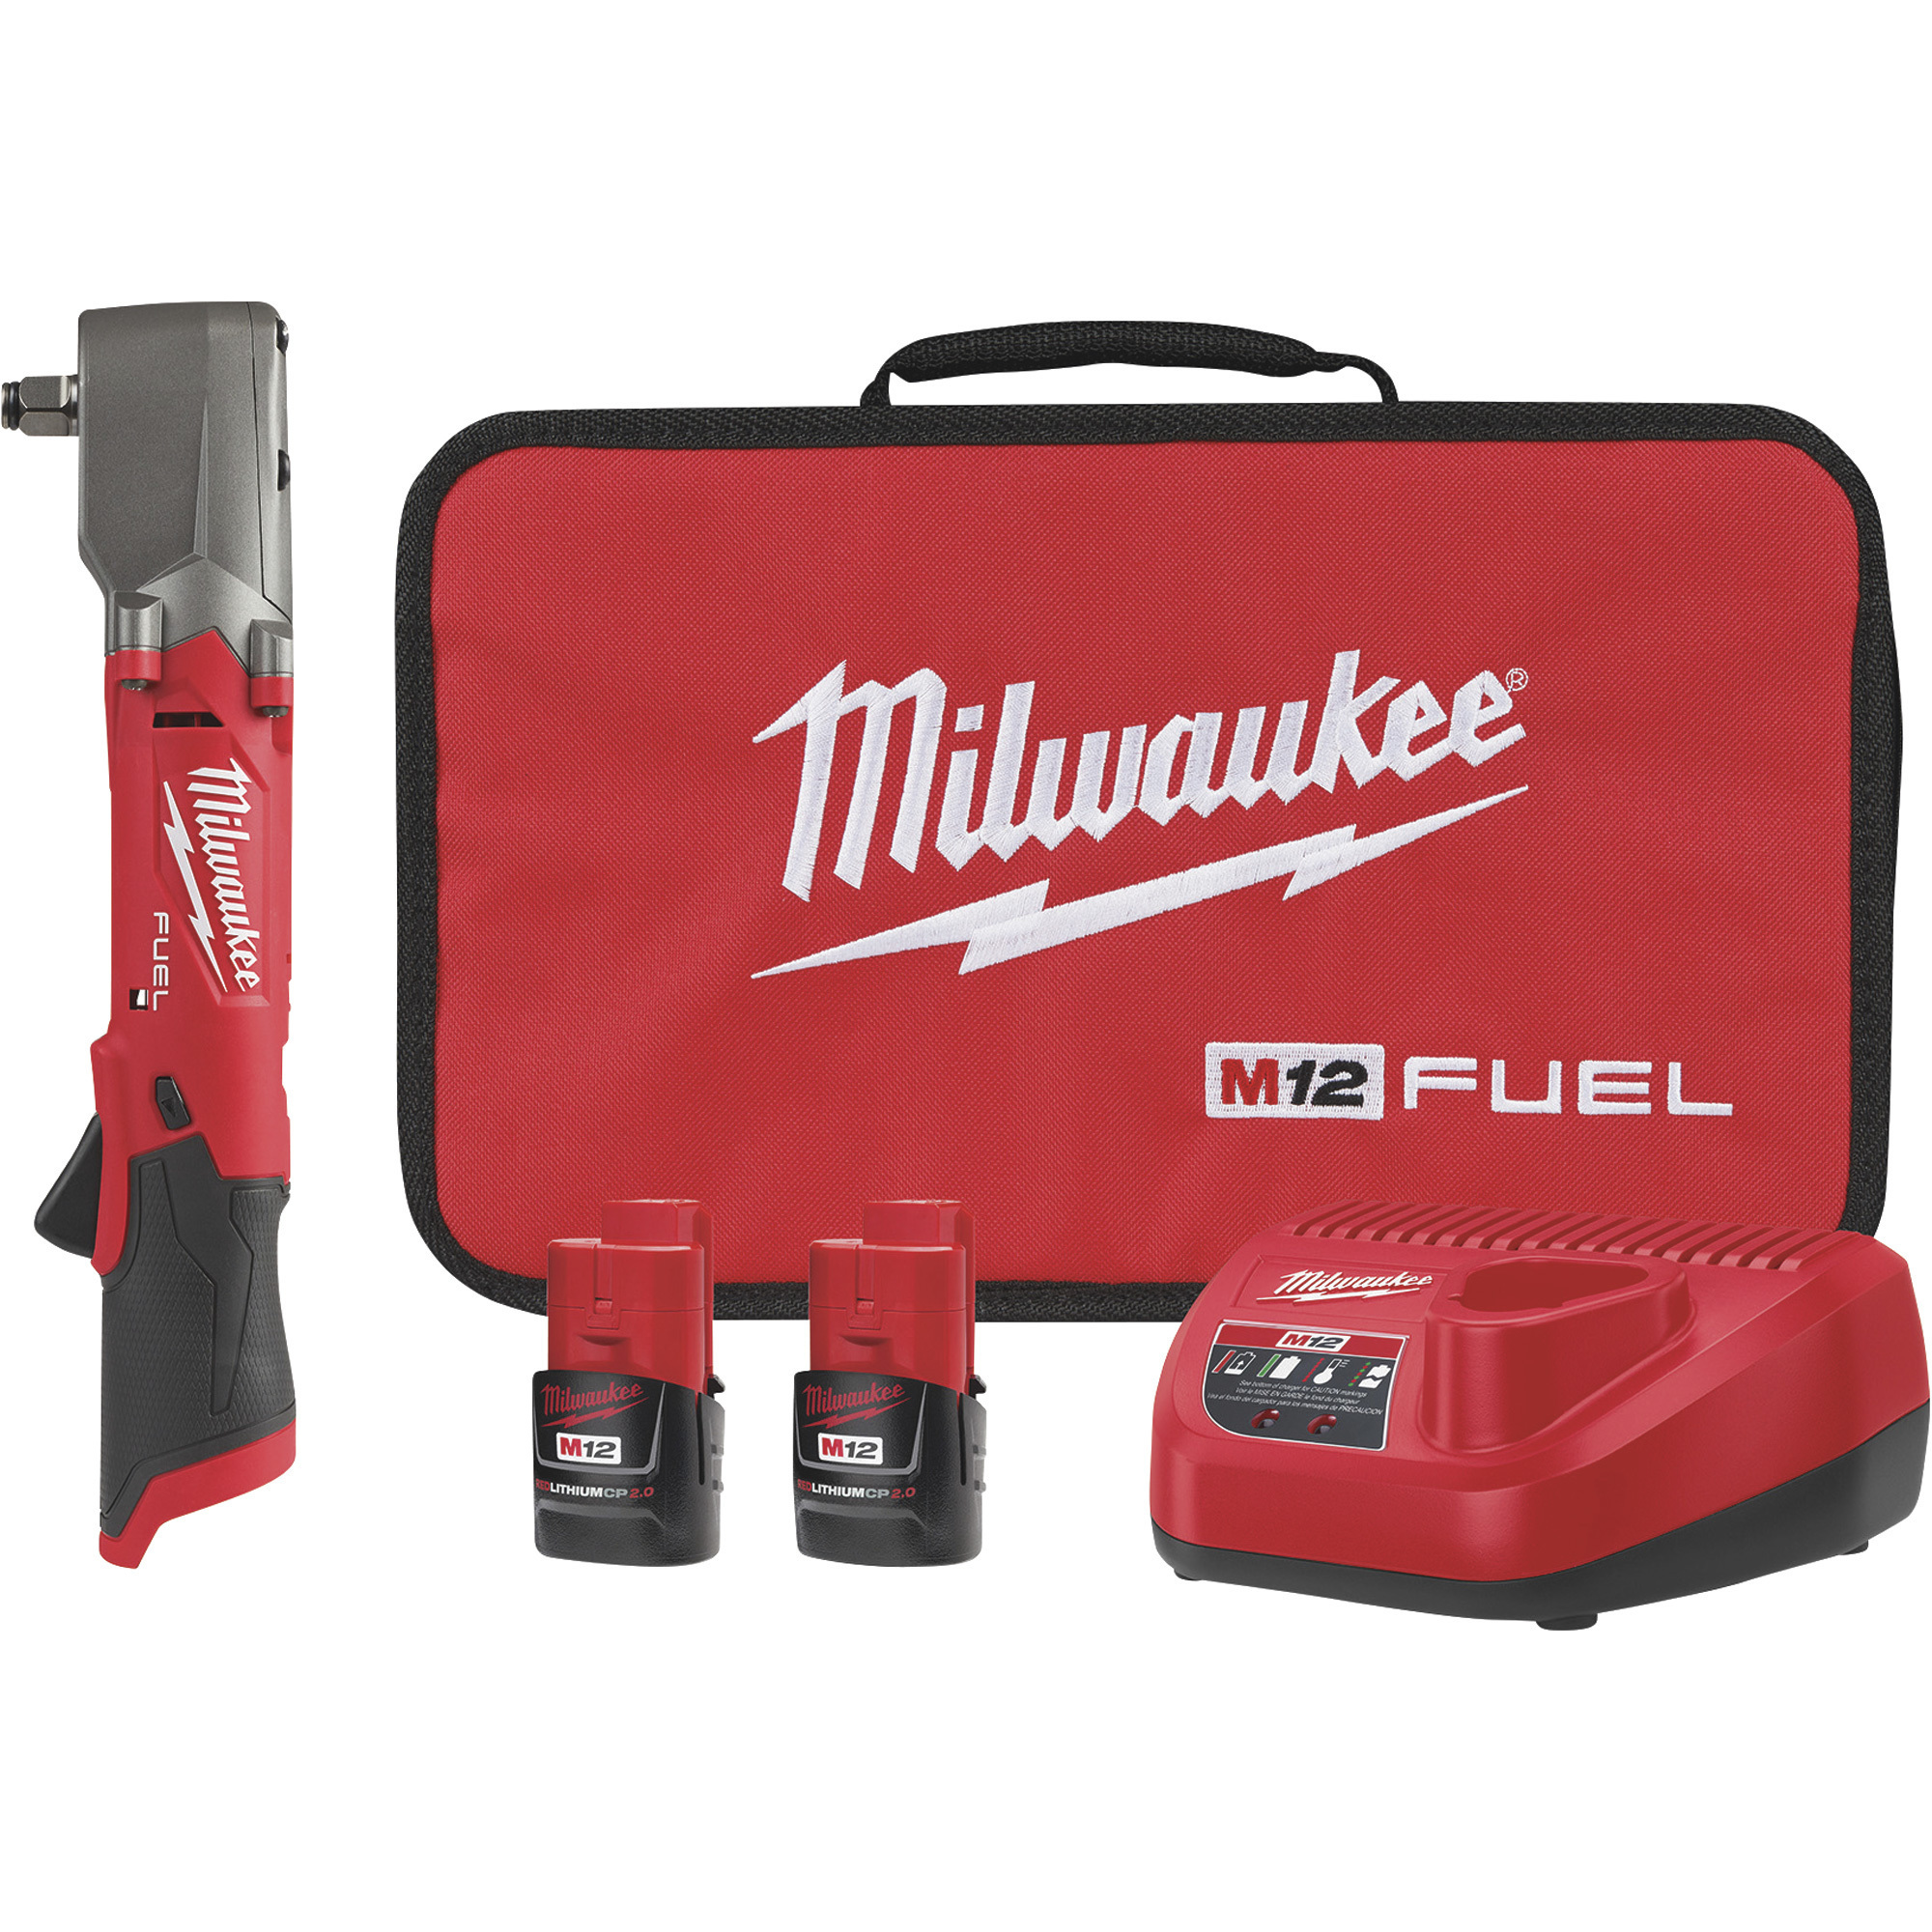 Milwaukee M12 FUEL Right Angle 1/2in. Impact Wrench with Friction Ring Kit, 220 Ft./Lbs. Torque, 2 Batteries, Model 2565-22